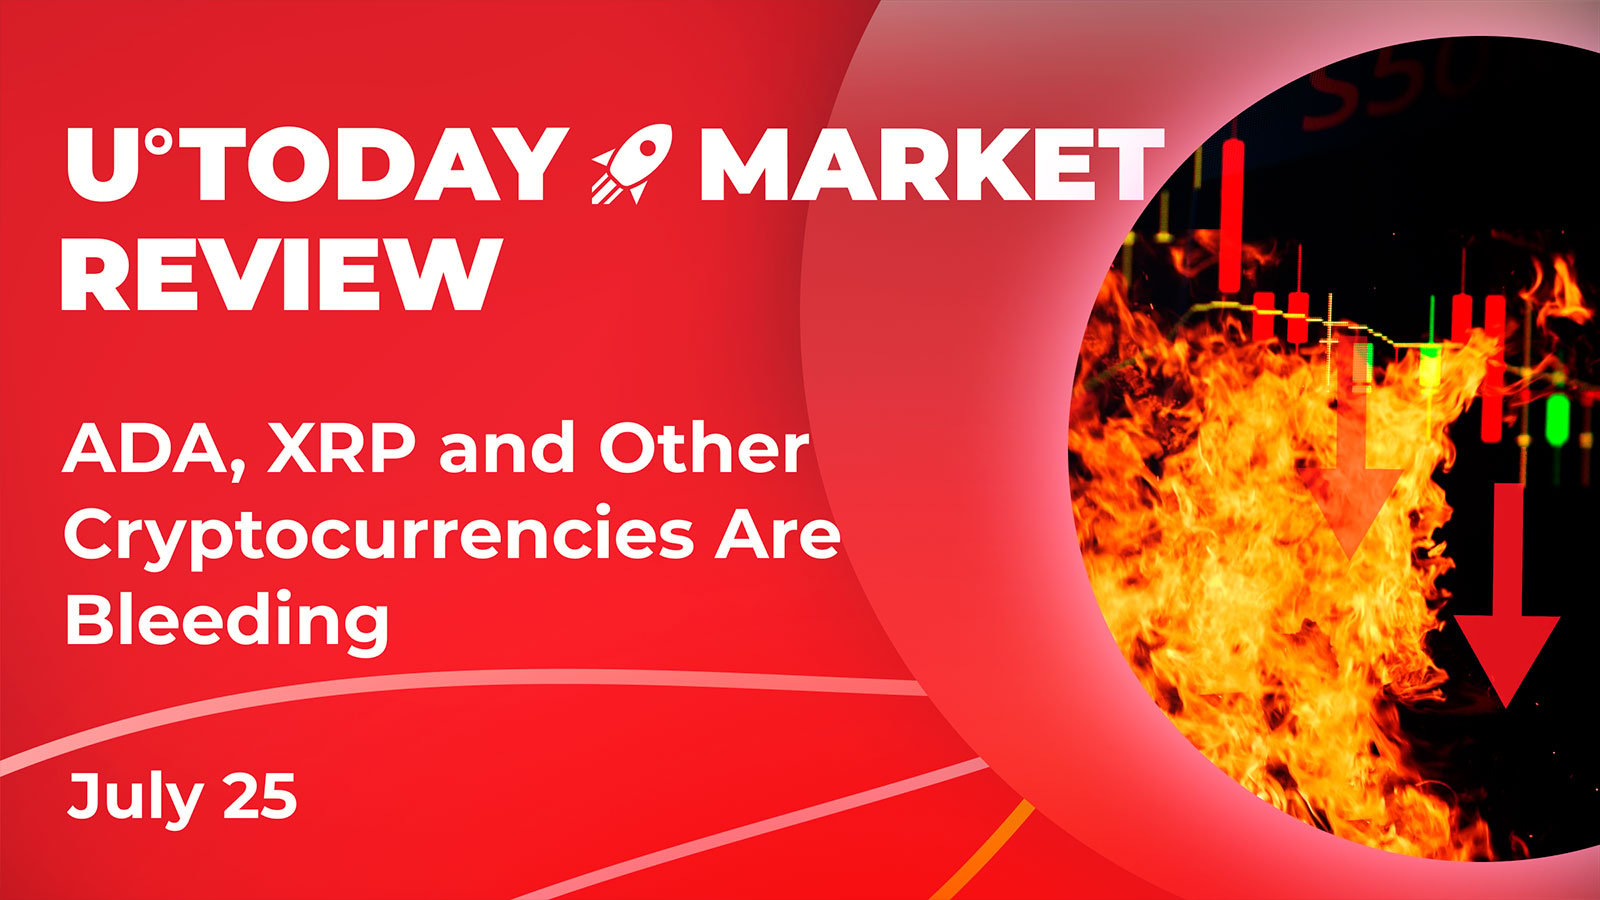 Cardano, XRP and Others Losing 5-10%, But It's Way Too Early to Panic: Crypto Market Review, July 25